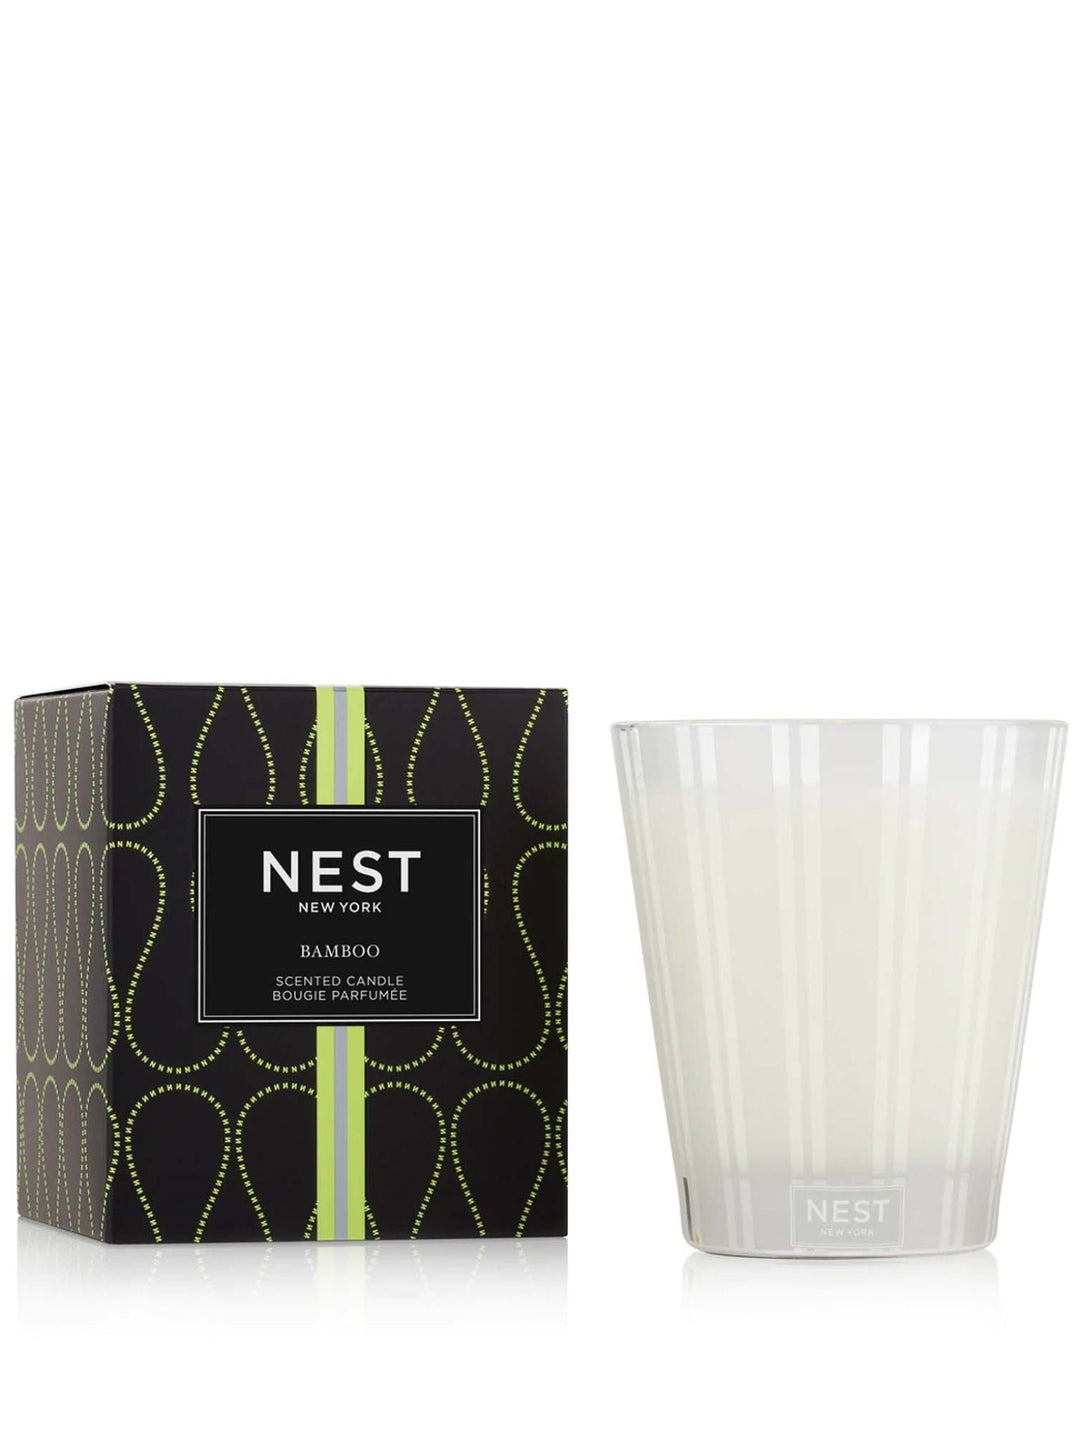 NEST Bamboo Classic CandleCandles